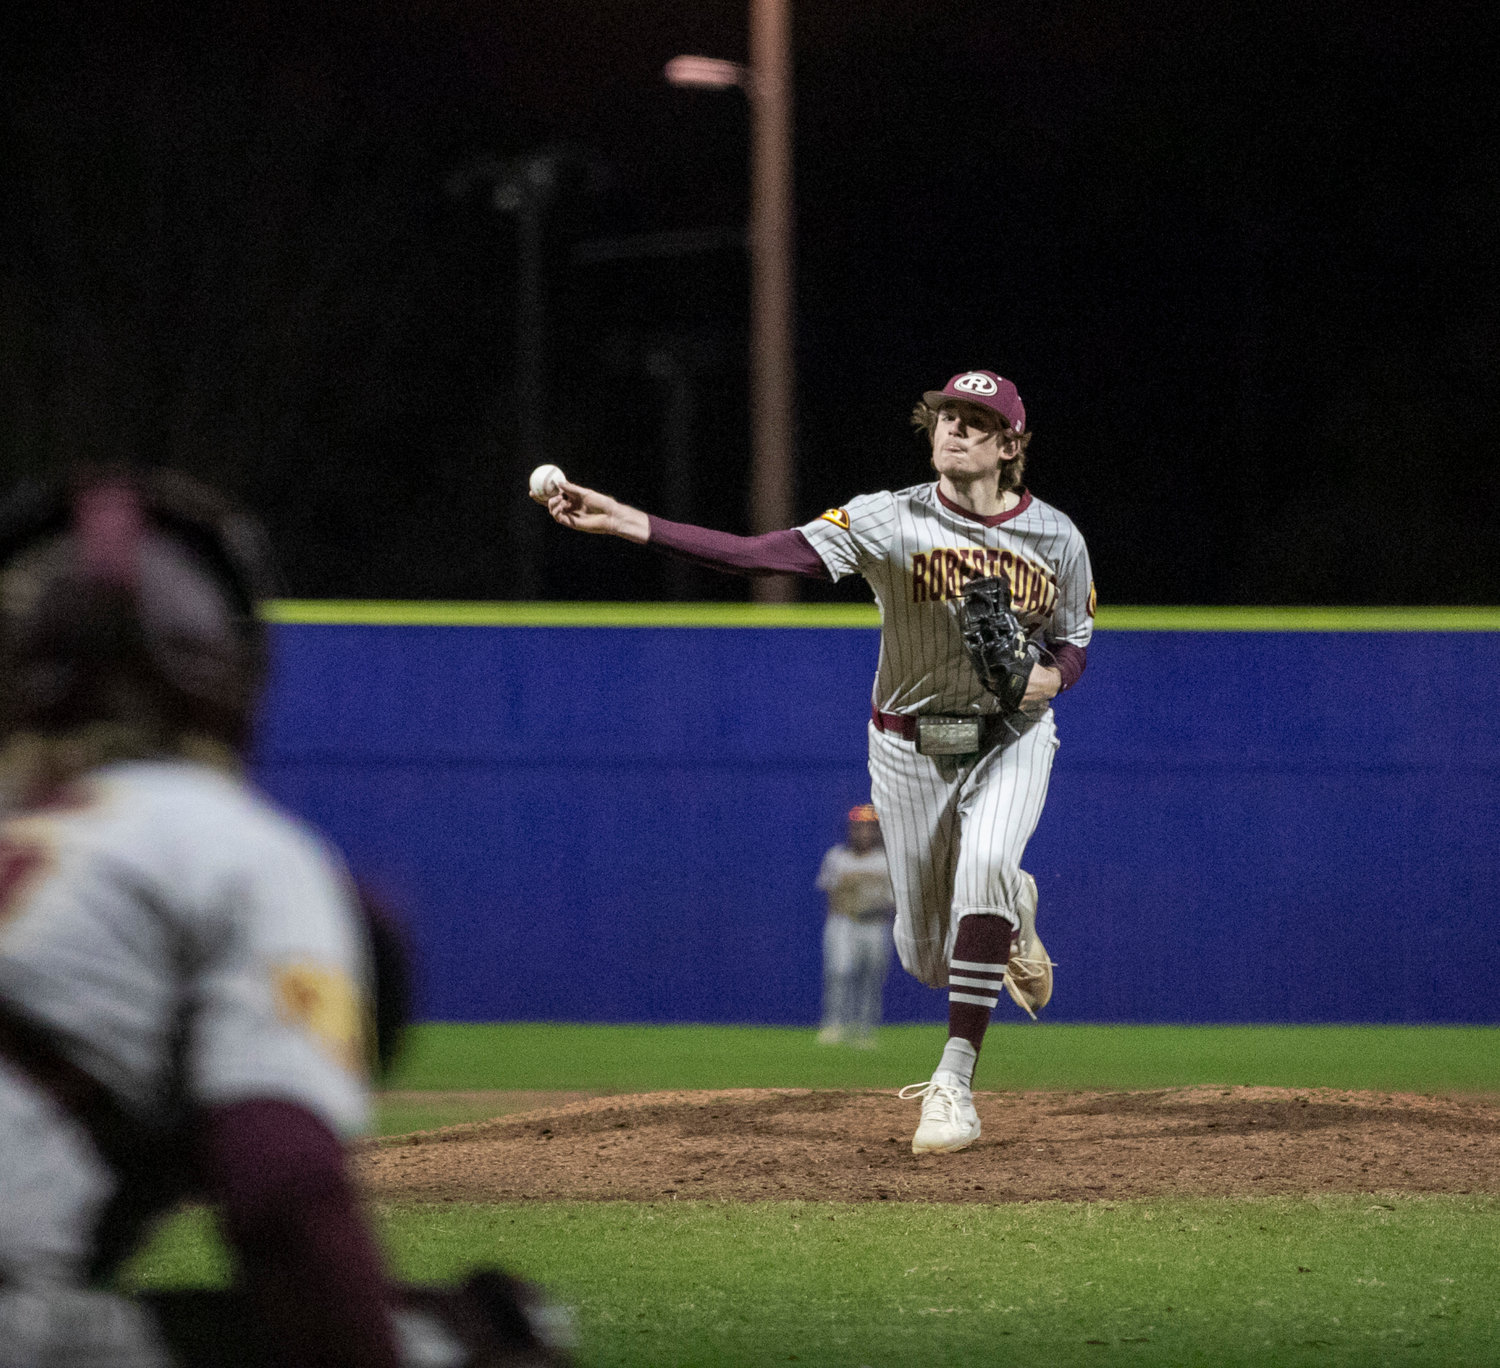 Robertsdale senior Dane Wigstrom fires a throw during the fourth inning of Friday’s non-area contest between the Golden Bears and Fairhope Pirates at Volanta Sports Park.